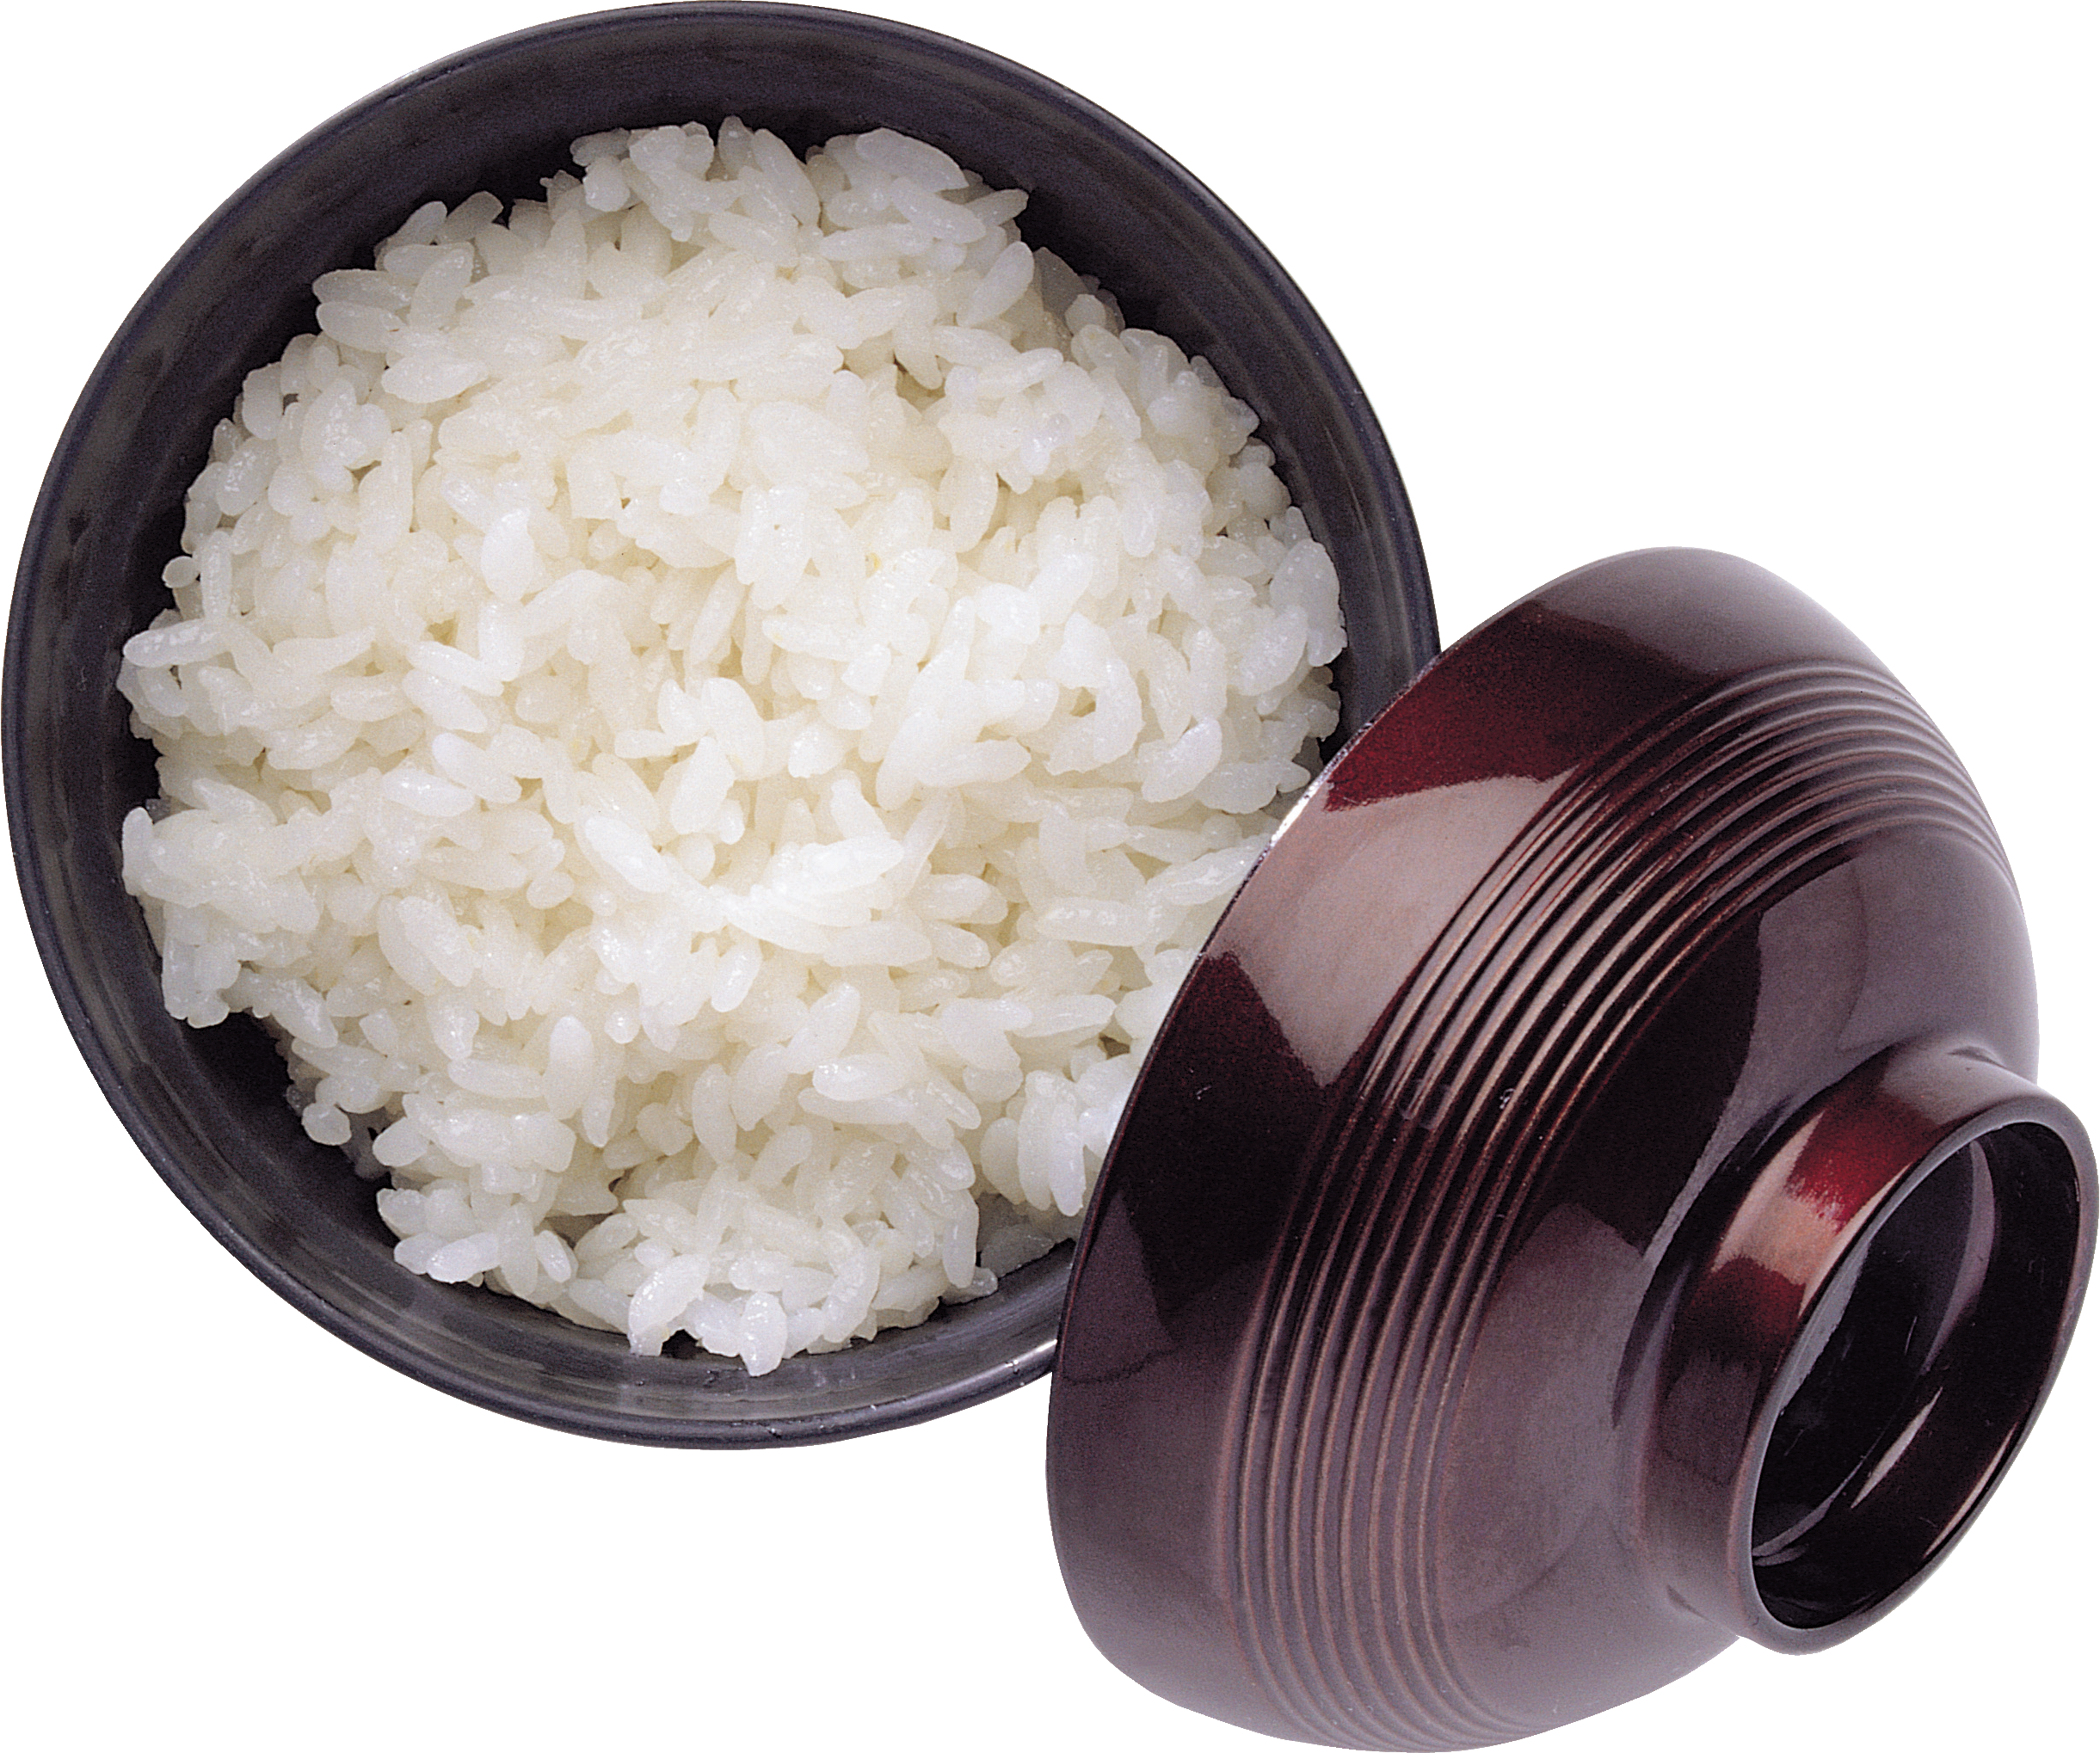 japanese clipart steamed rice